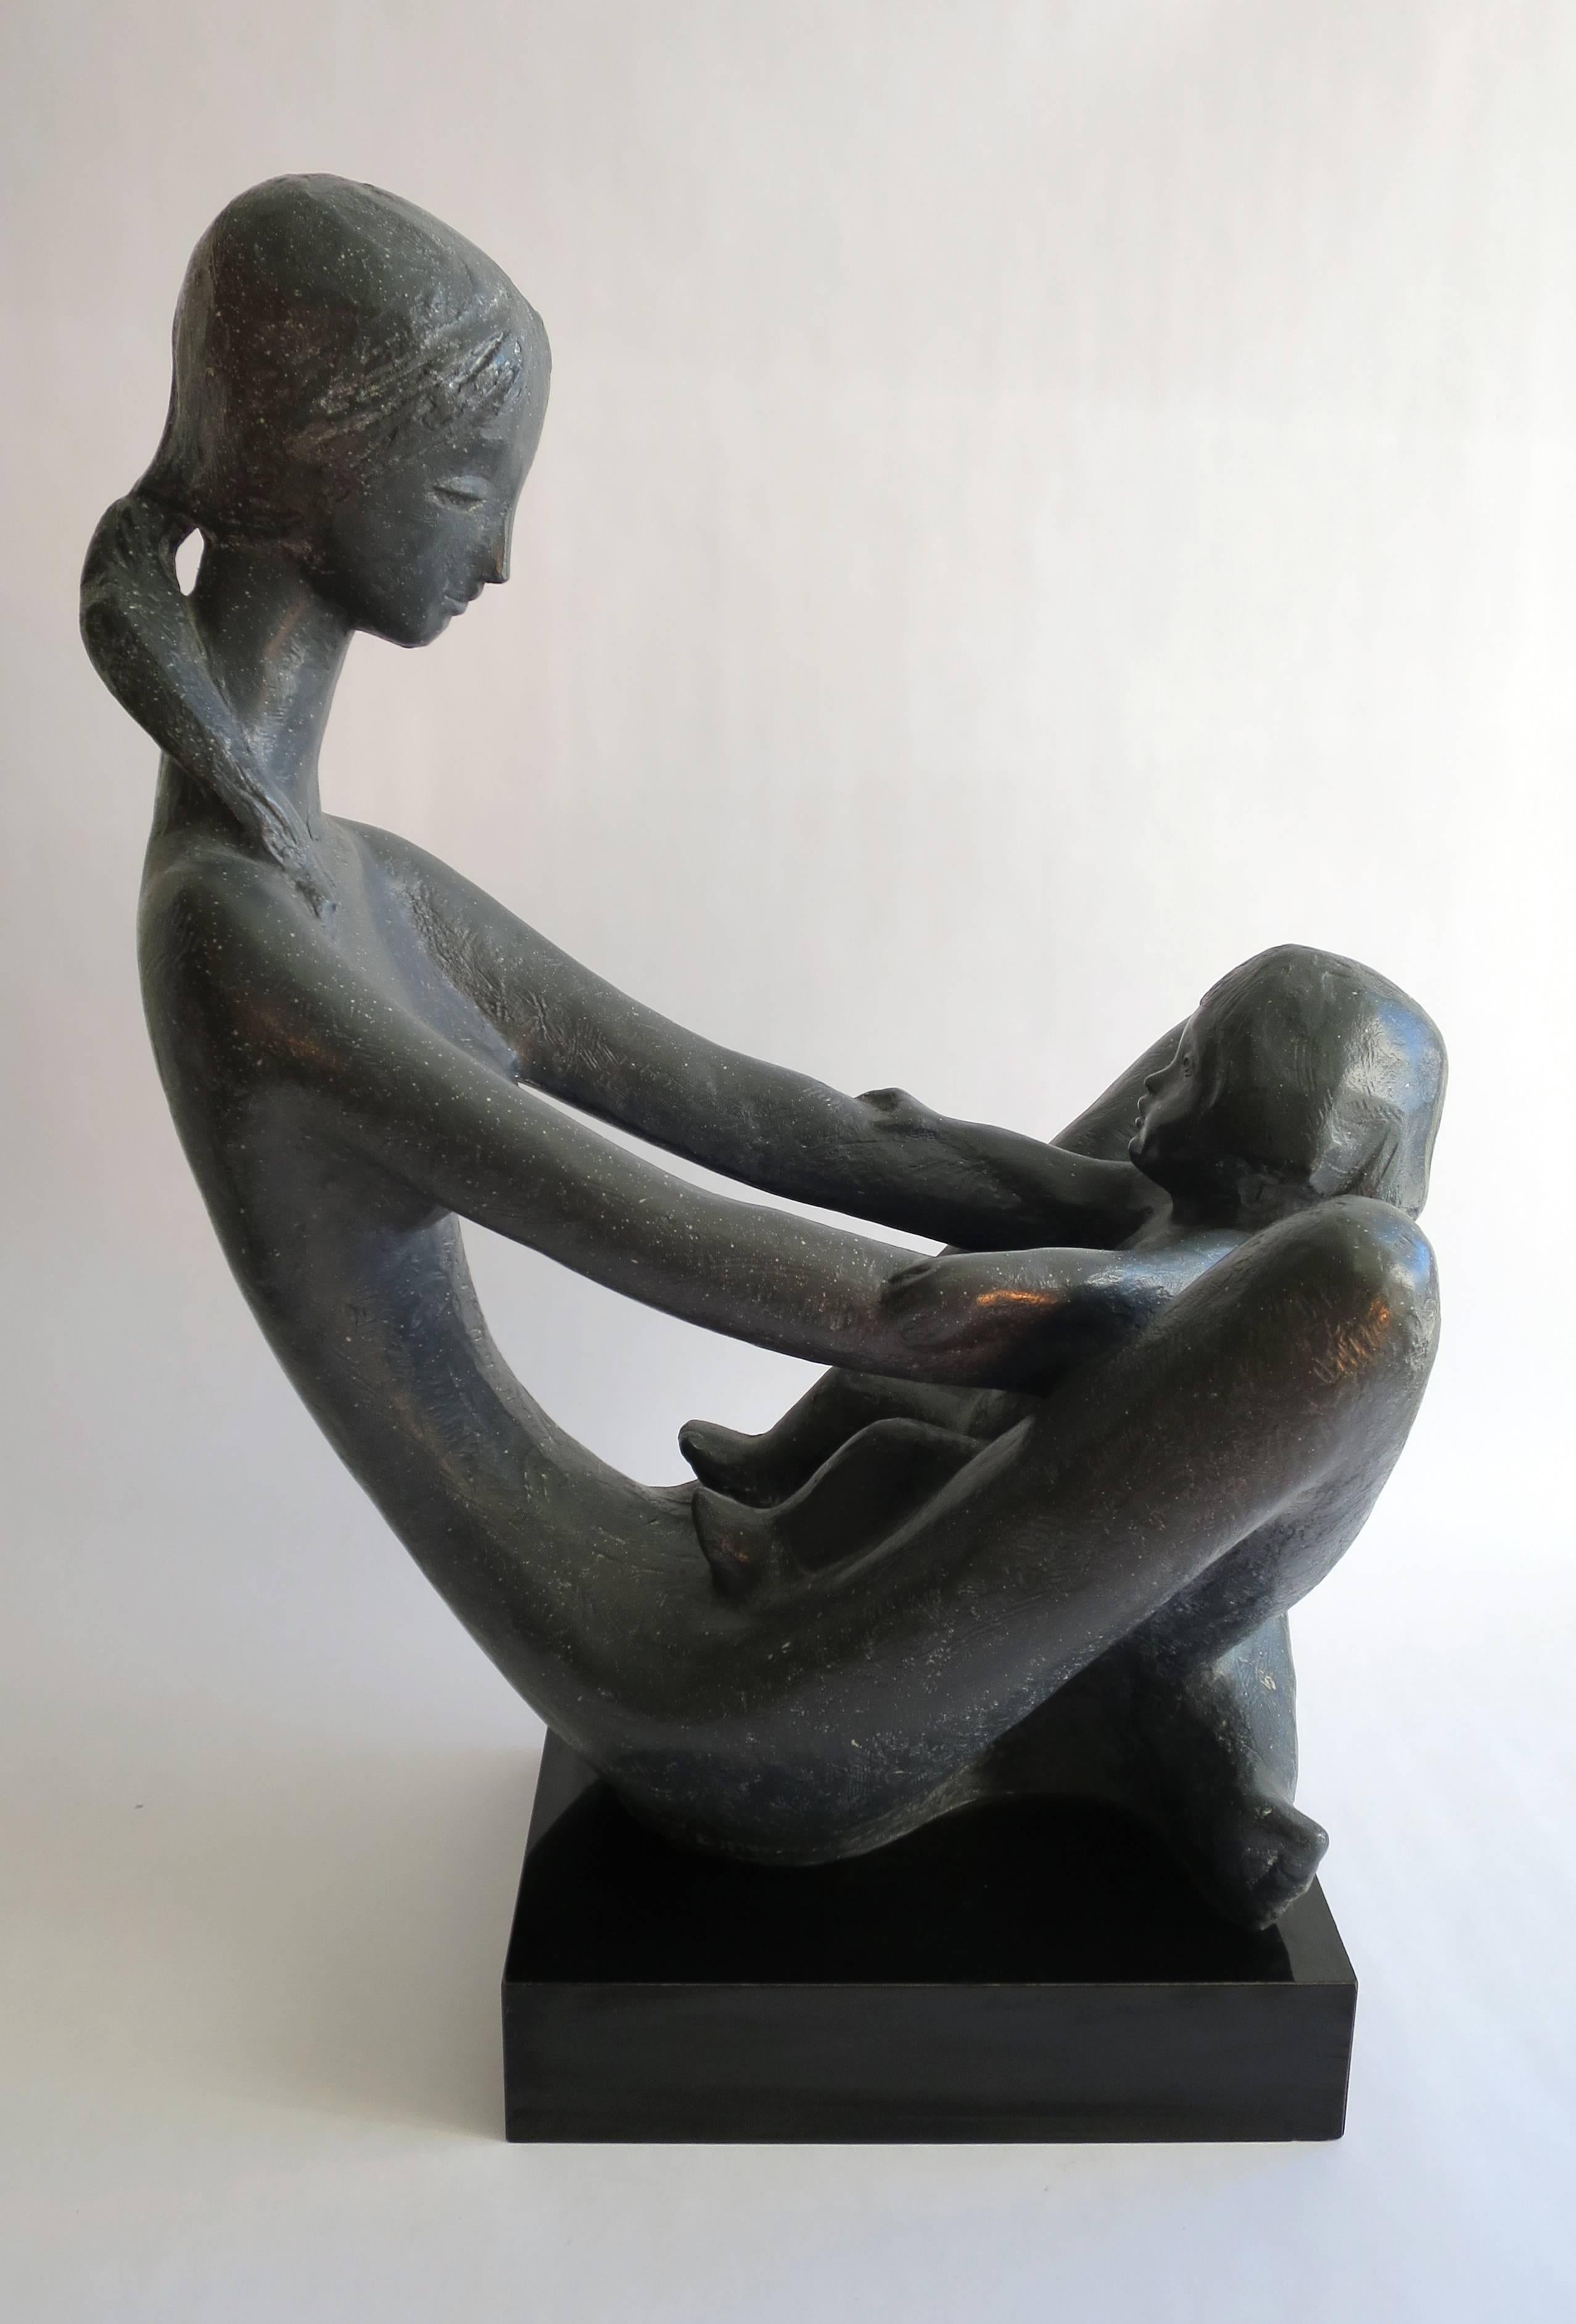 Vintage sculpture of 'Mother and Child' by Austin Productions, 1979. Excellent condition.